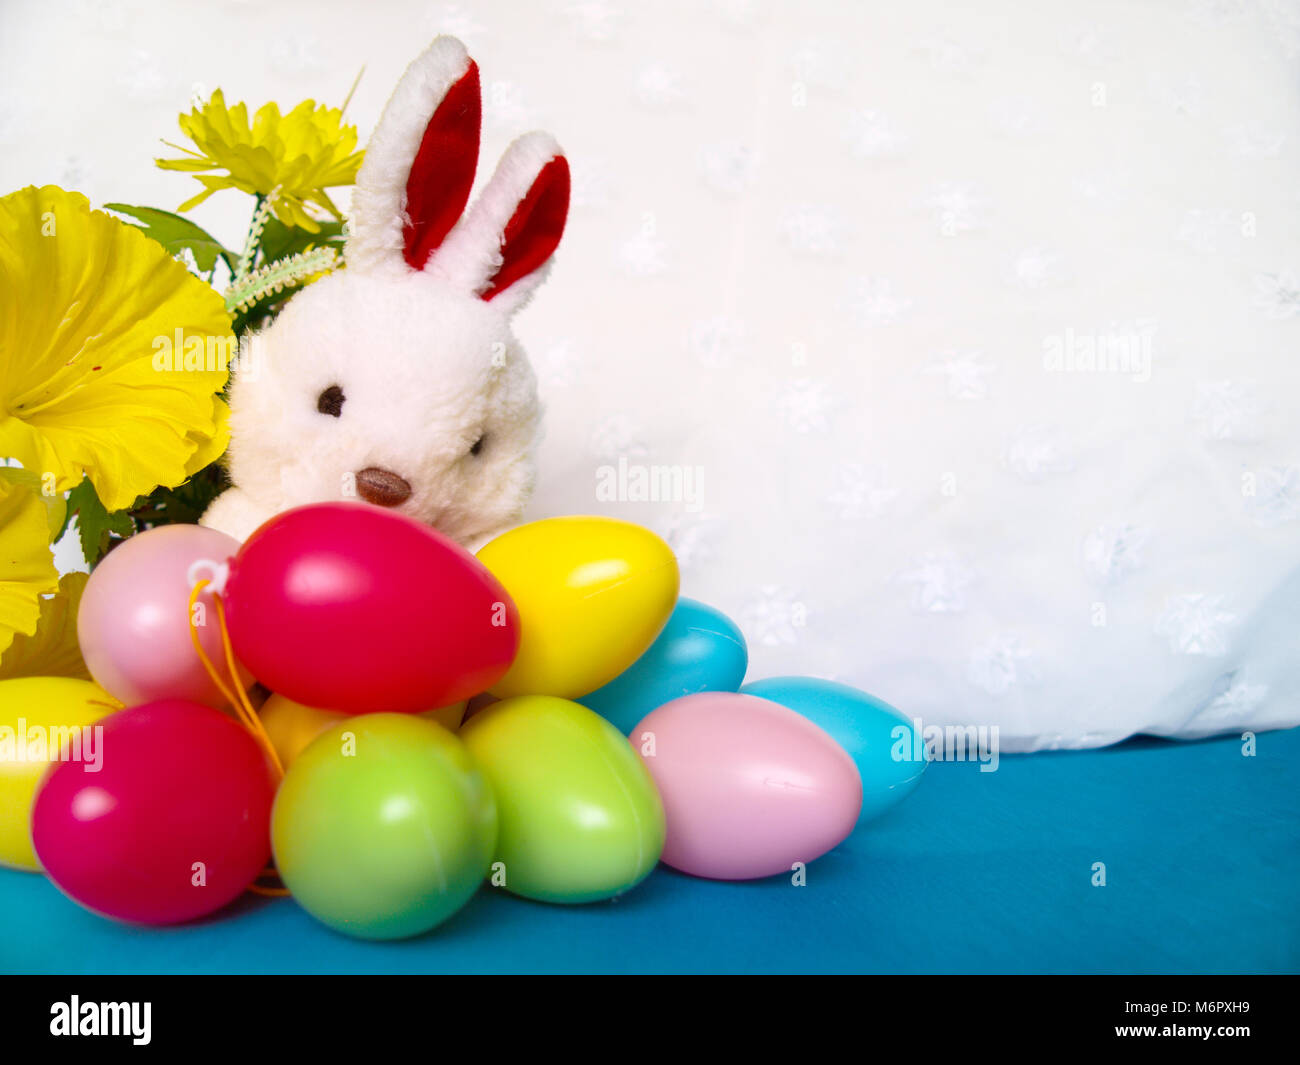 White plush rabbit with colorful Easter eggs and yellow flowers. Empty space for text. Stock Photo